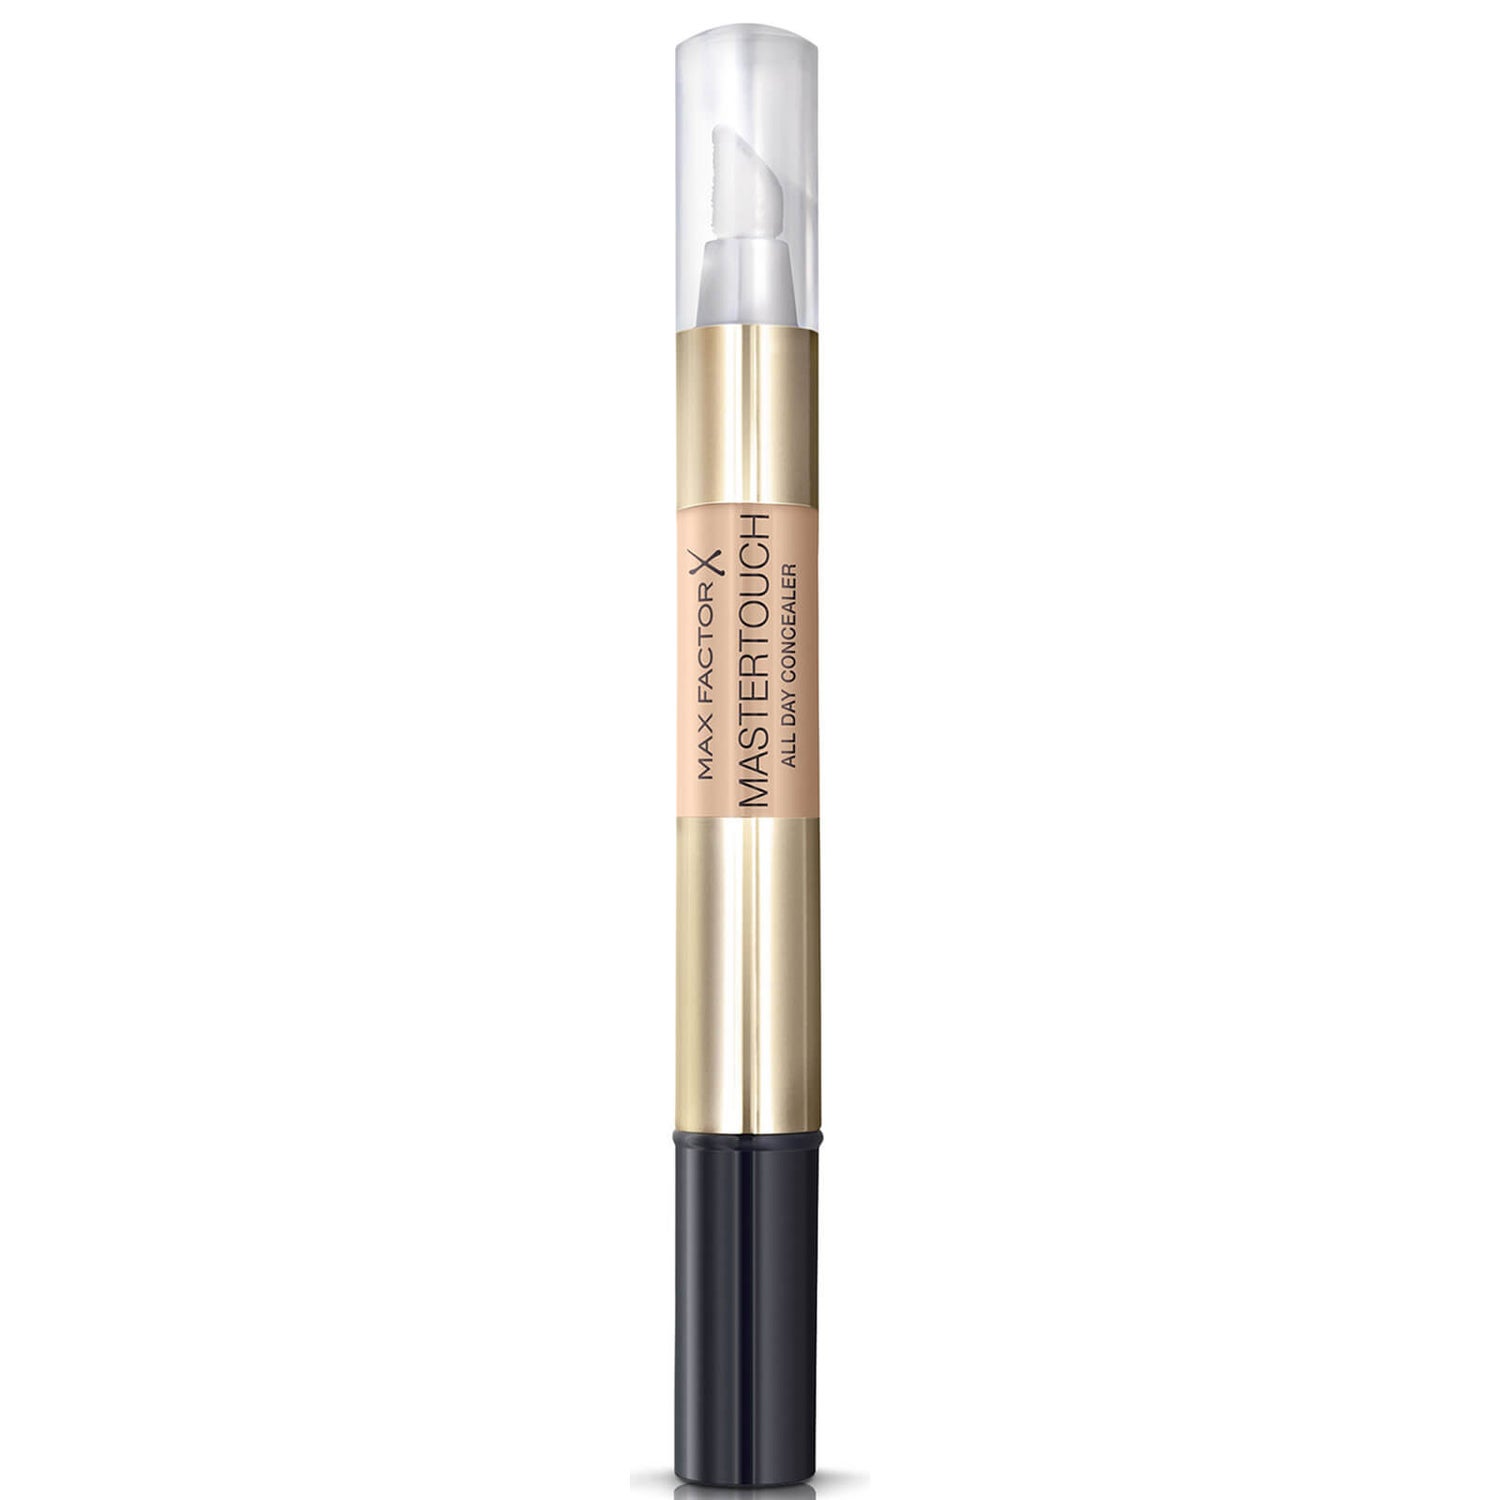 Max Factor Mastertouch All Day Concealer Pen – 303 Ivory